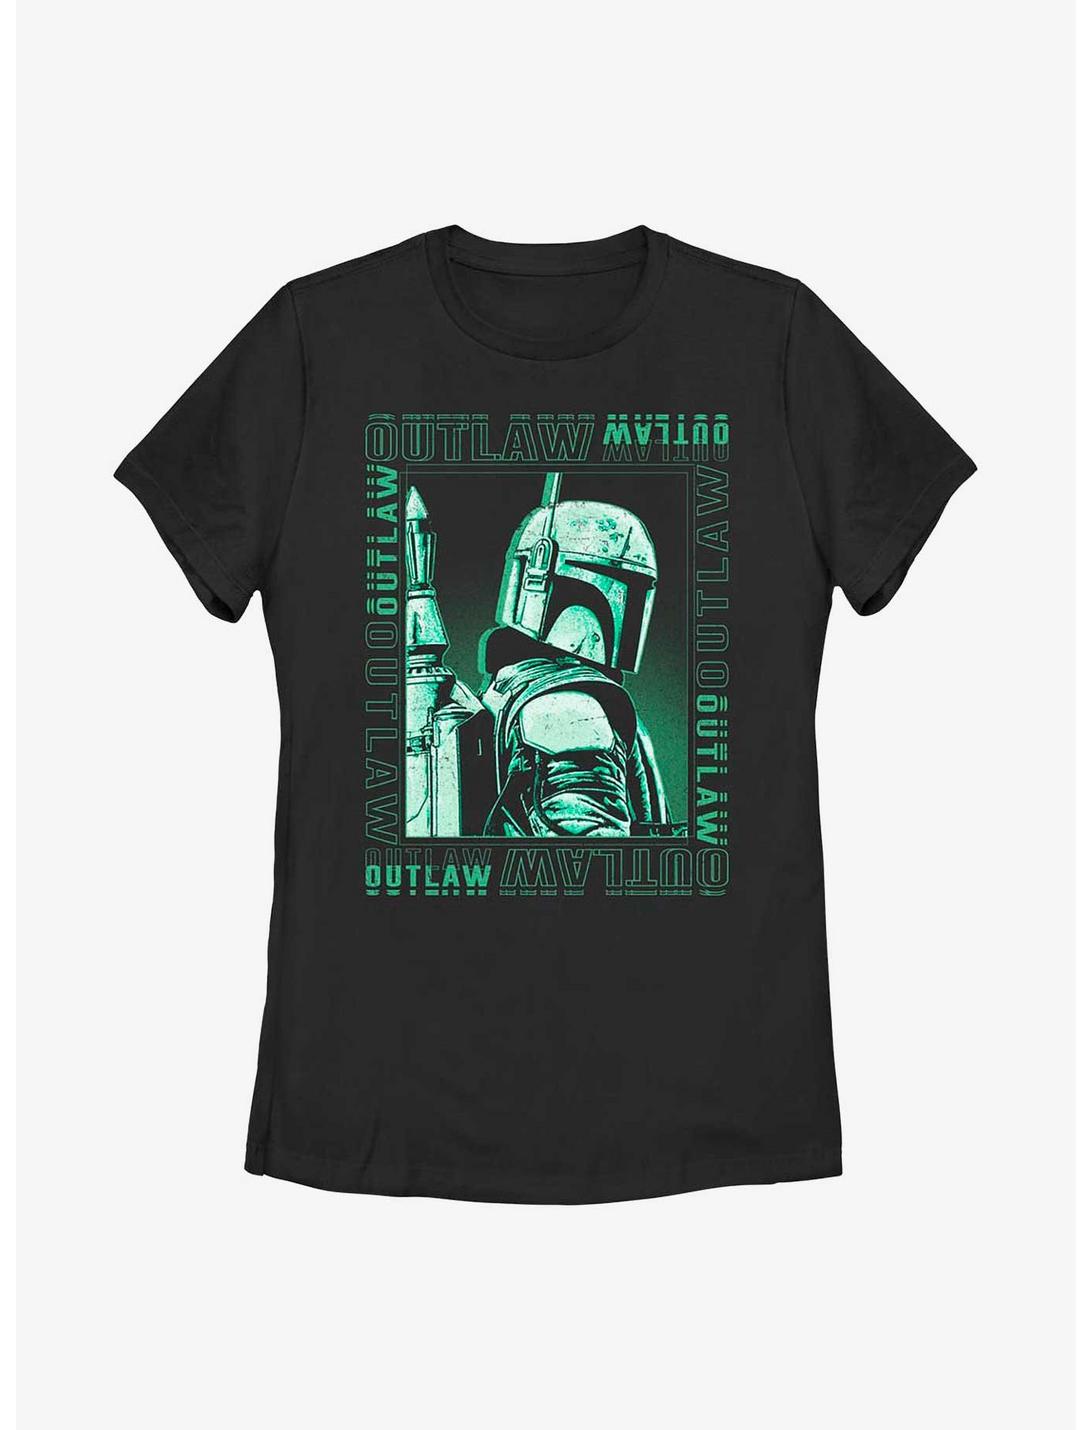 Star Wars: The Book Of Boba Fett Boxed Outlaw Womens T-Shirt, BLACK, hi-res